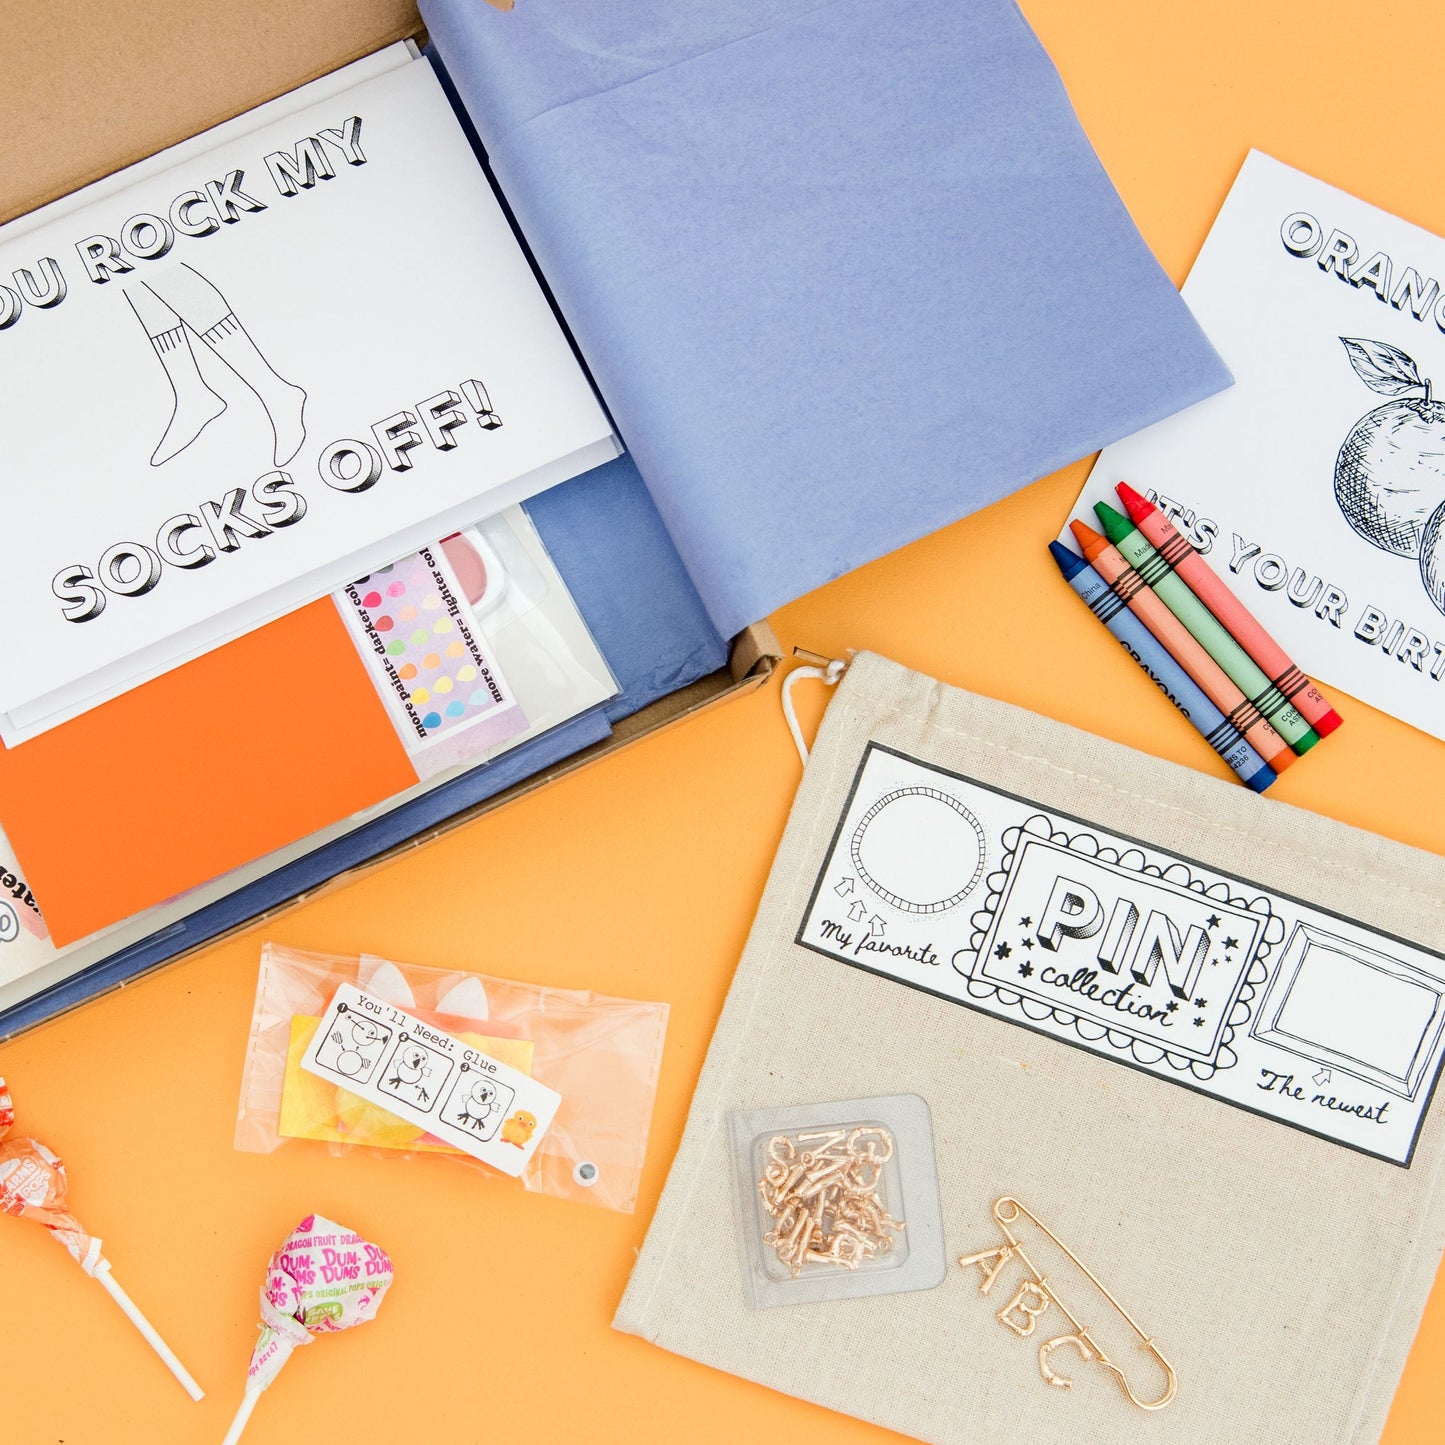 Get Your Odd On: 6 Months of The Oddball Club Subscription Box